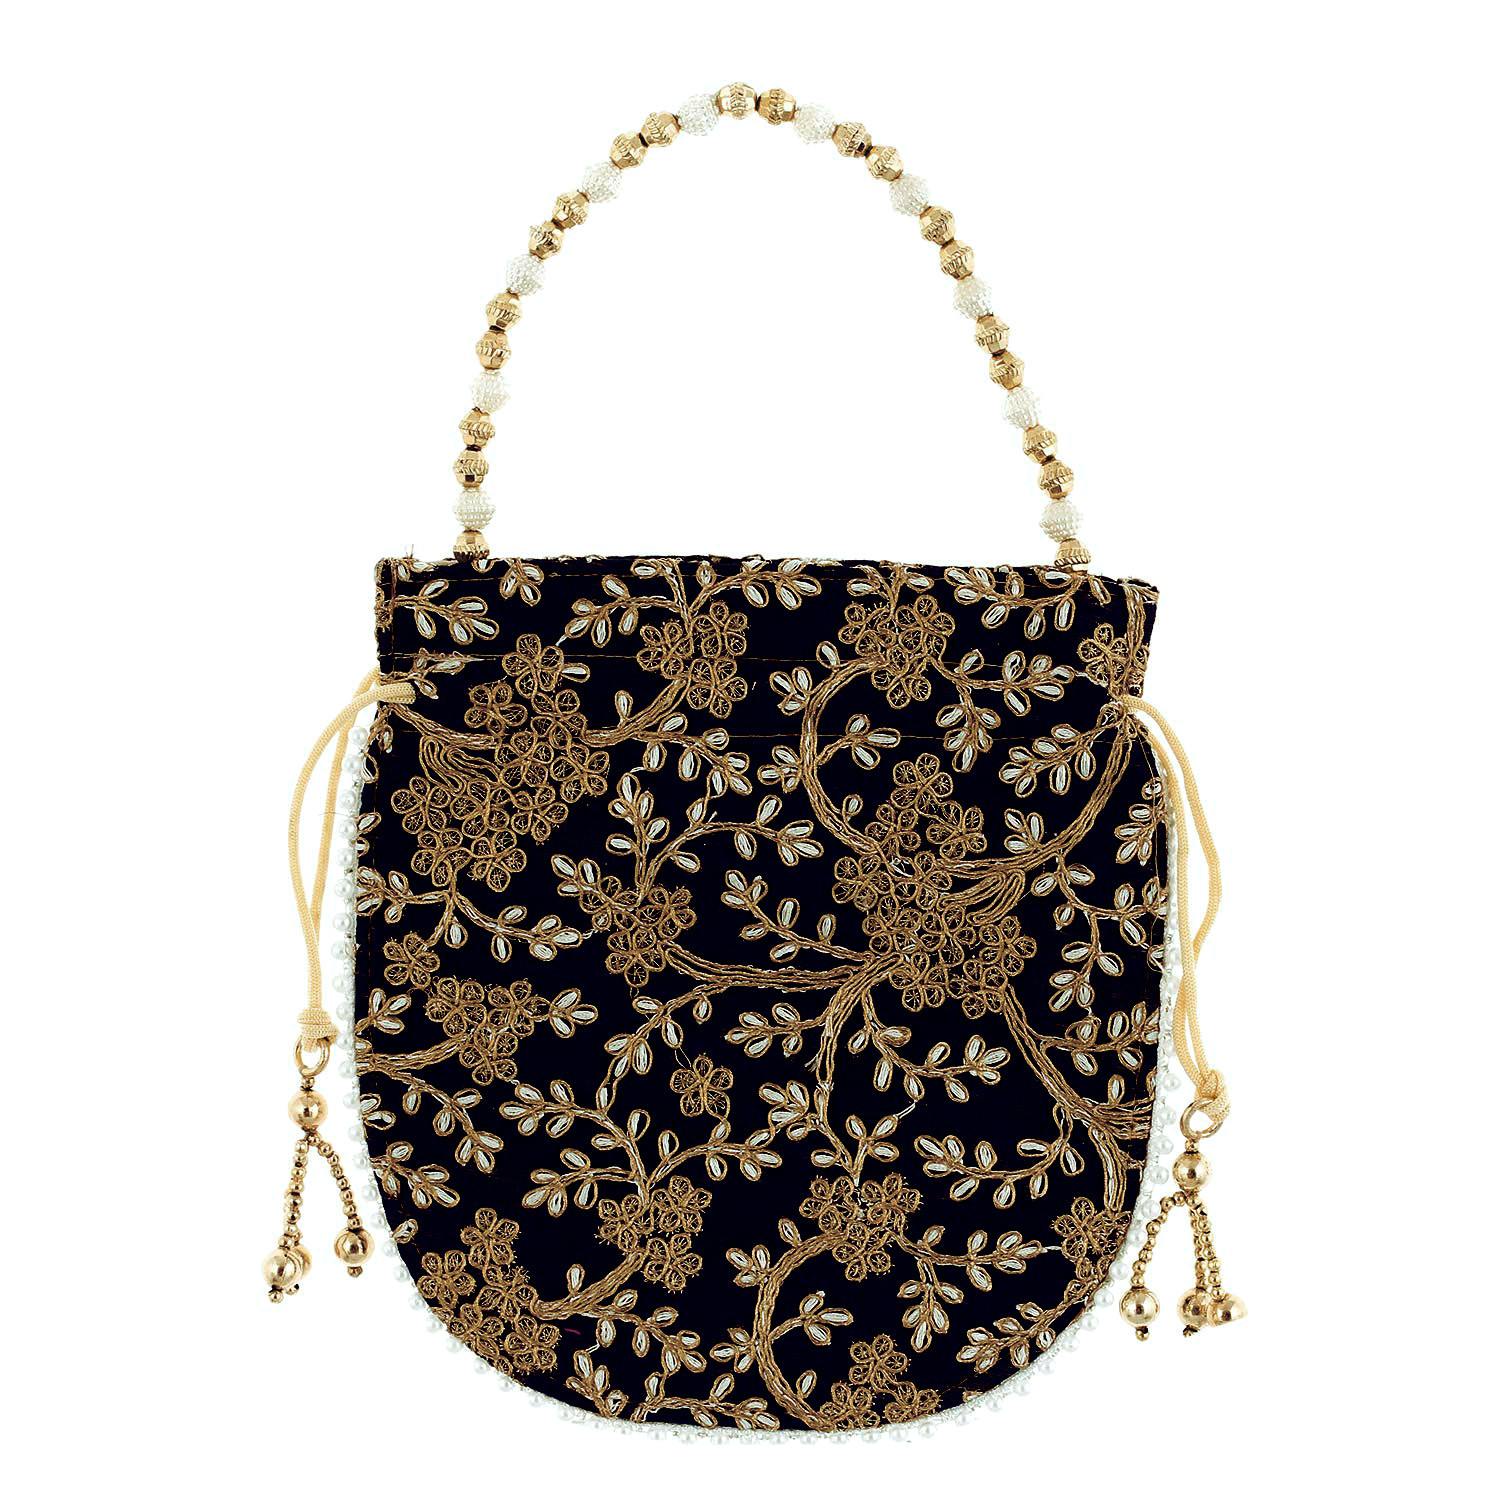 Kuber Industries Embroidery Drawstring Potli|Hand Purse With Gold Pearl Border & Handle For Woman,Girls (Black)